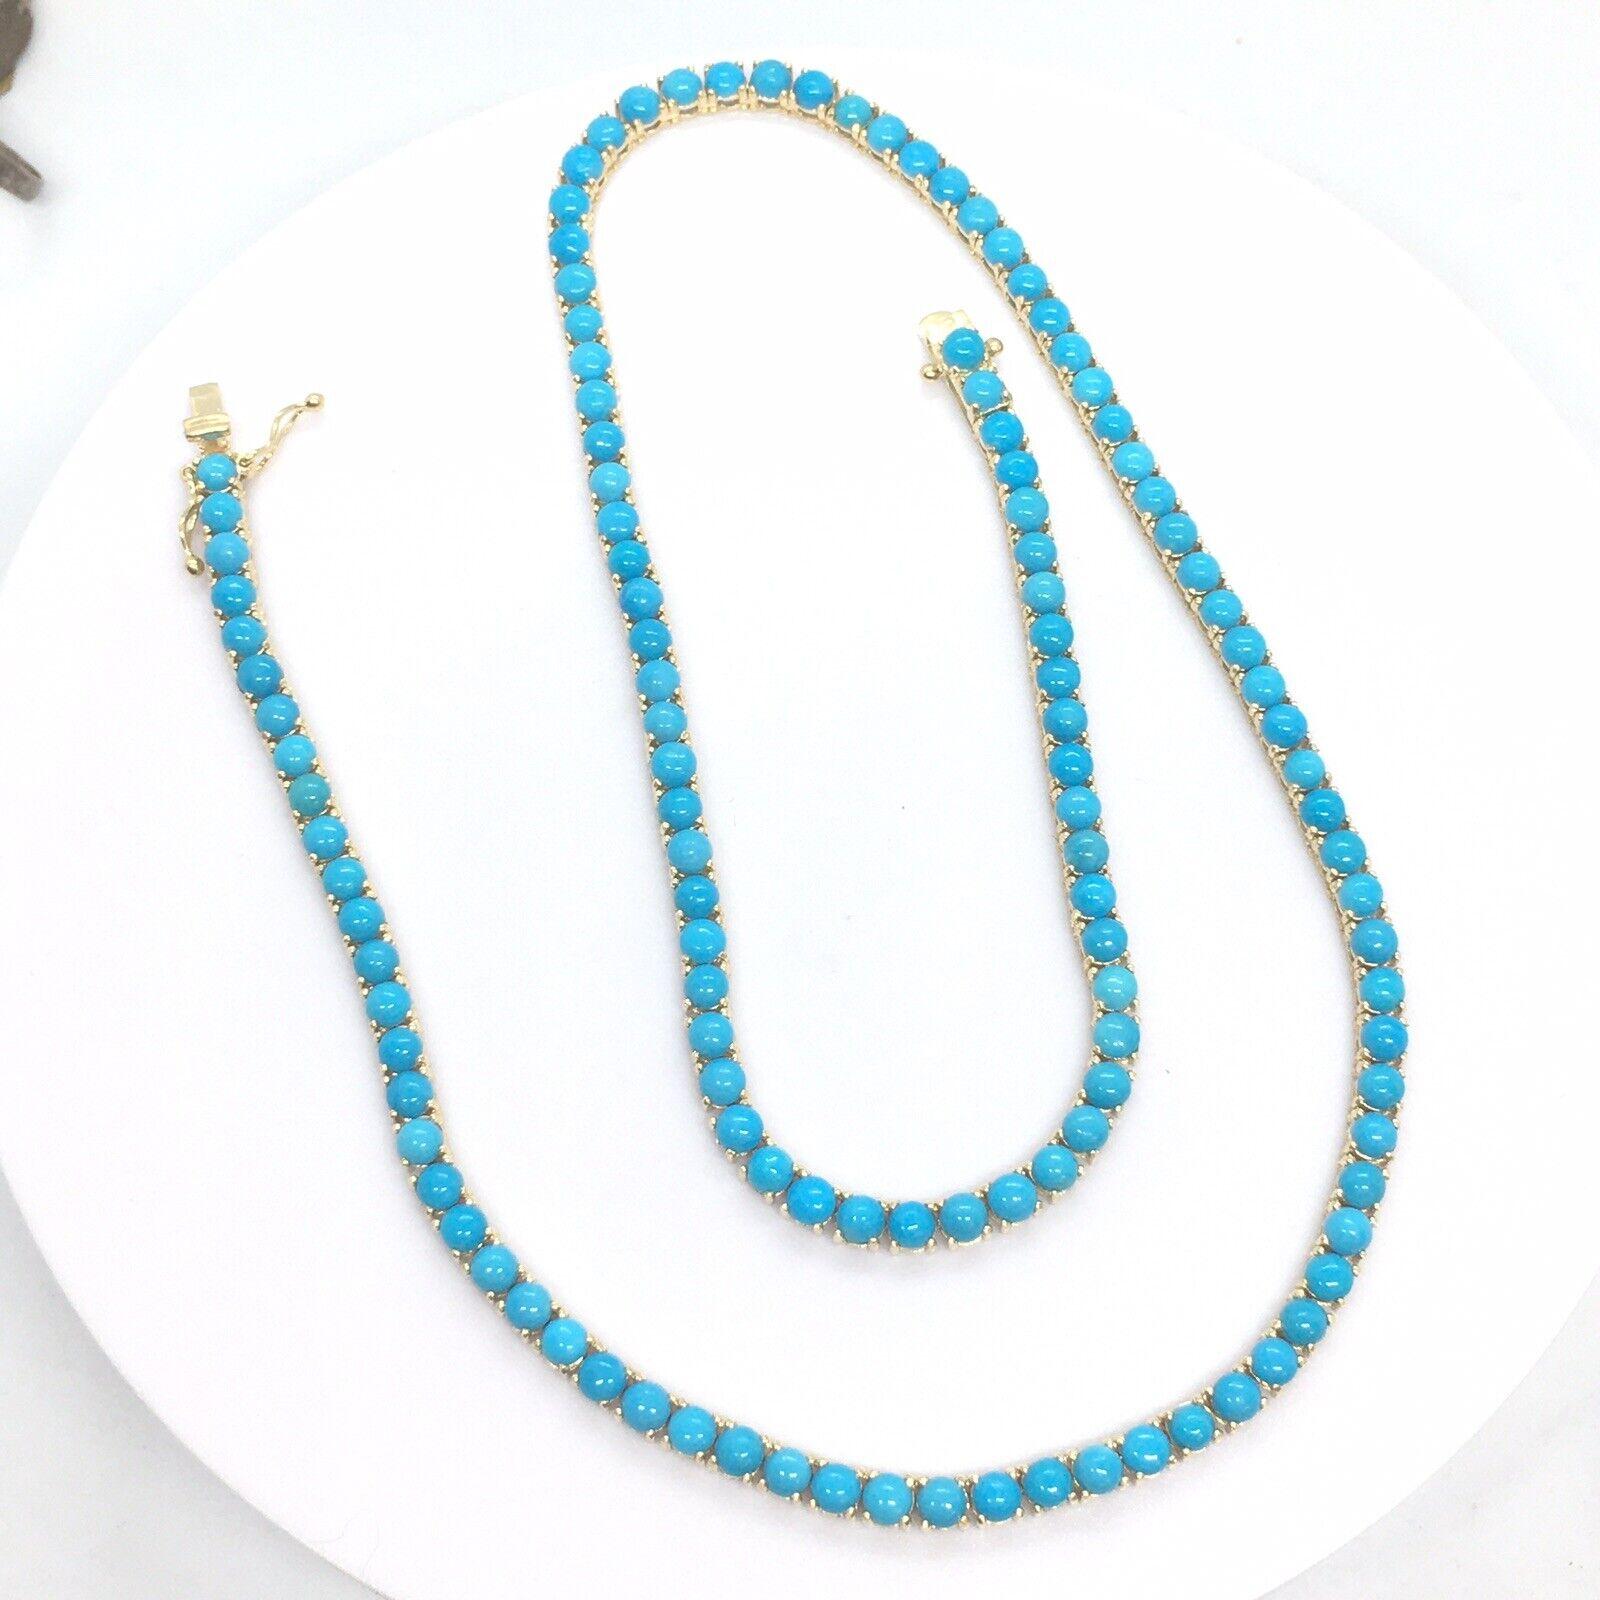 3.5 mm Round Cabochon Arizona Turquoise Tennis Necklace 14k Yellow Gold Necklace
New made in our shop, Santa Monica, Ca.

Weighting 23.5 gram made of 14K solid gold

Natural Mined Arizona 3.5 mm Round Cabochon Cut Turquoise

18.5 inch long